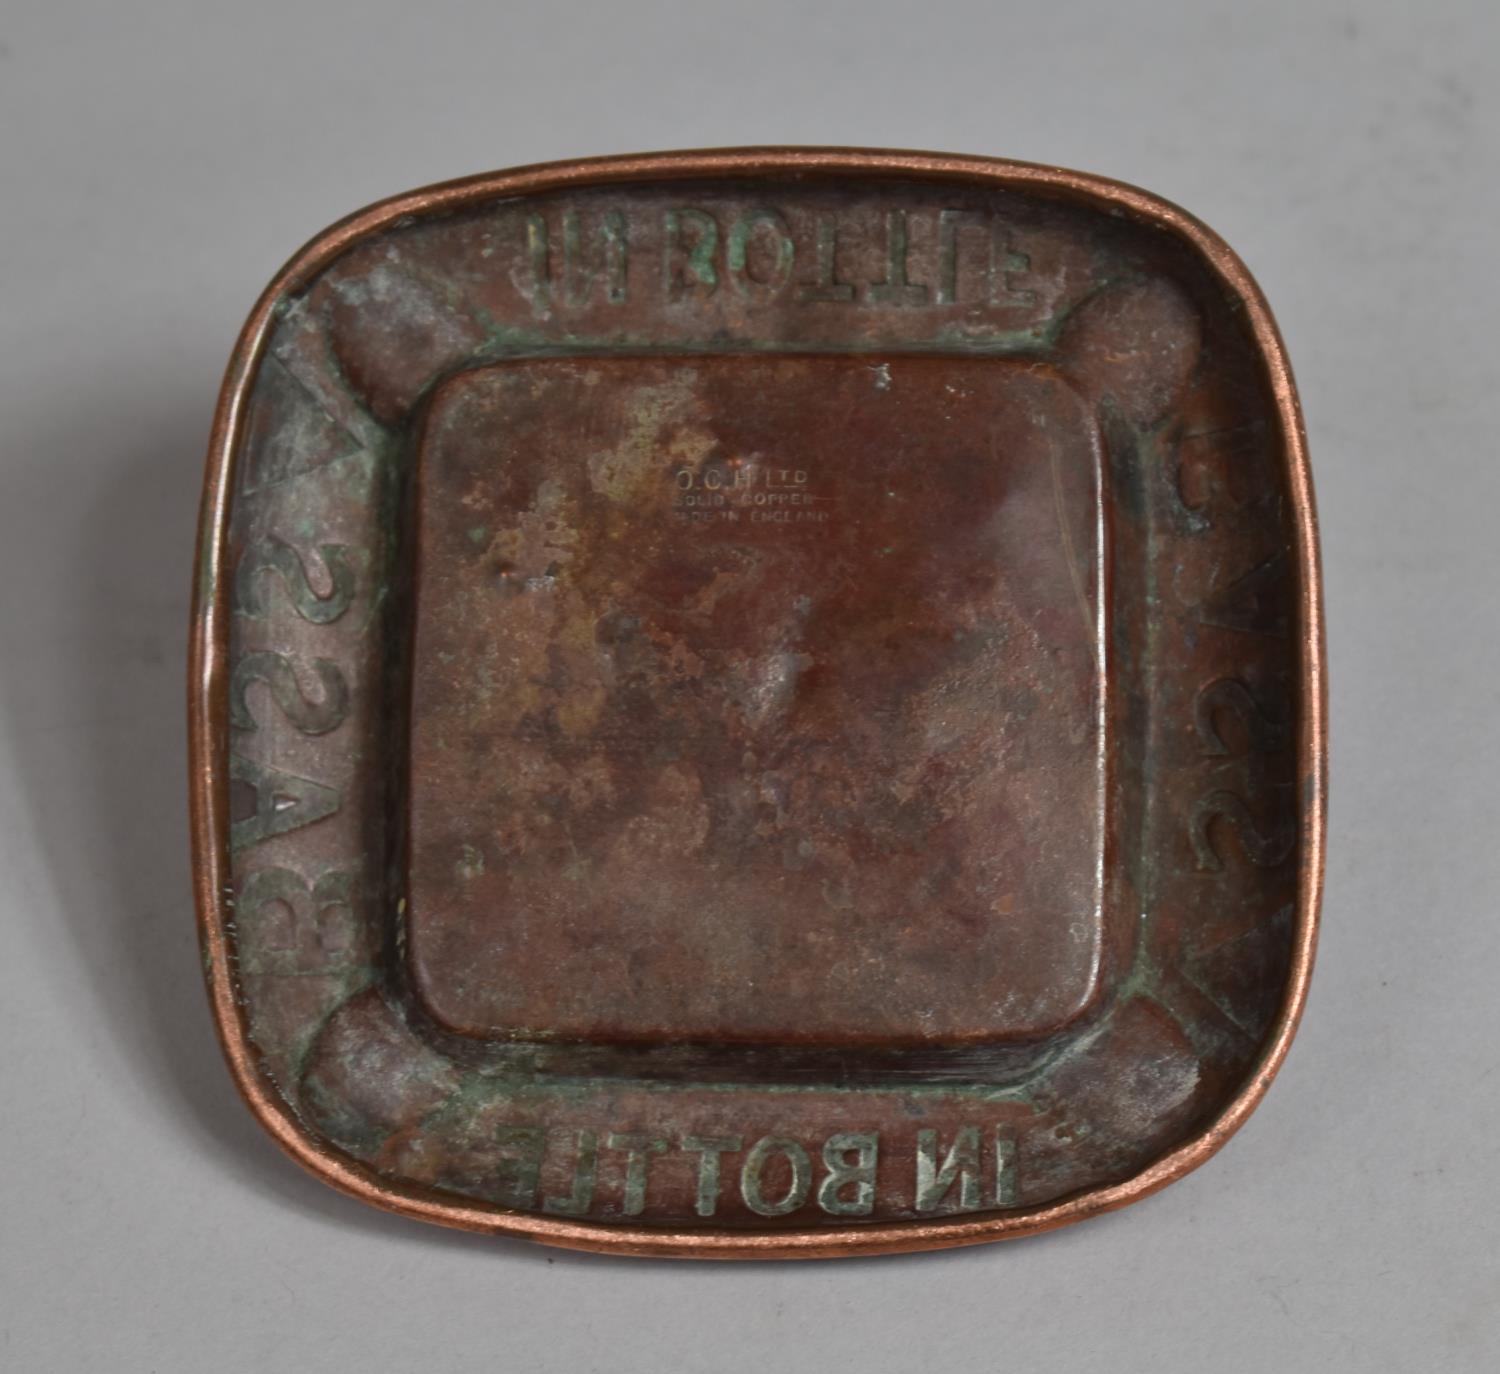 A Vintage Copper Advertising Ashtray, "Bass in Bottle", 12cm Square - Image 3 of 3